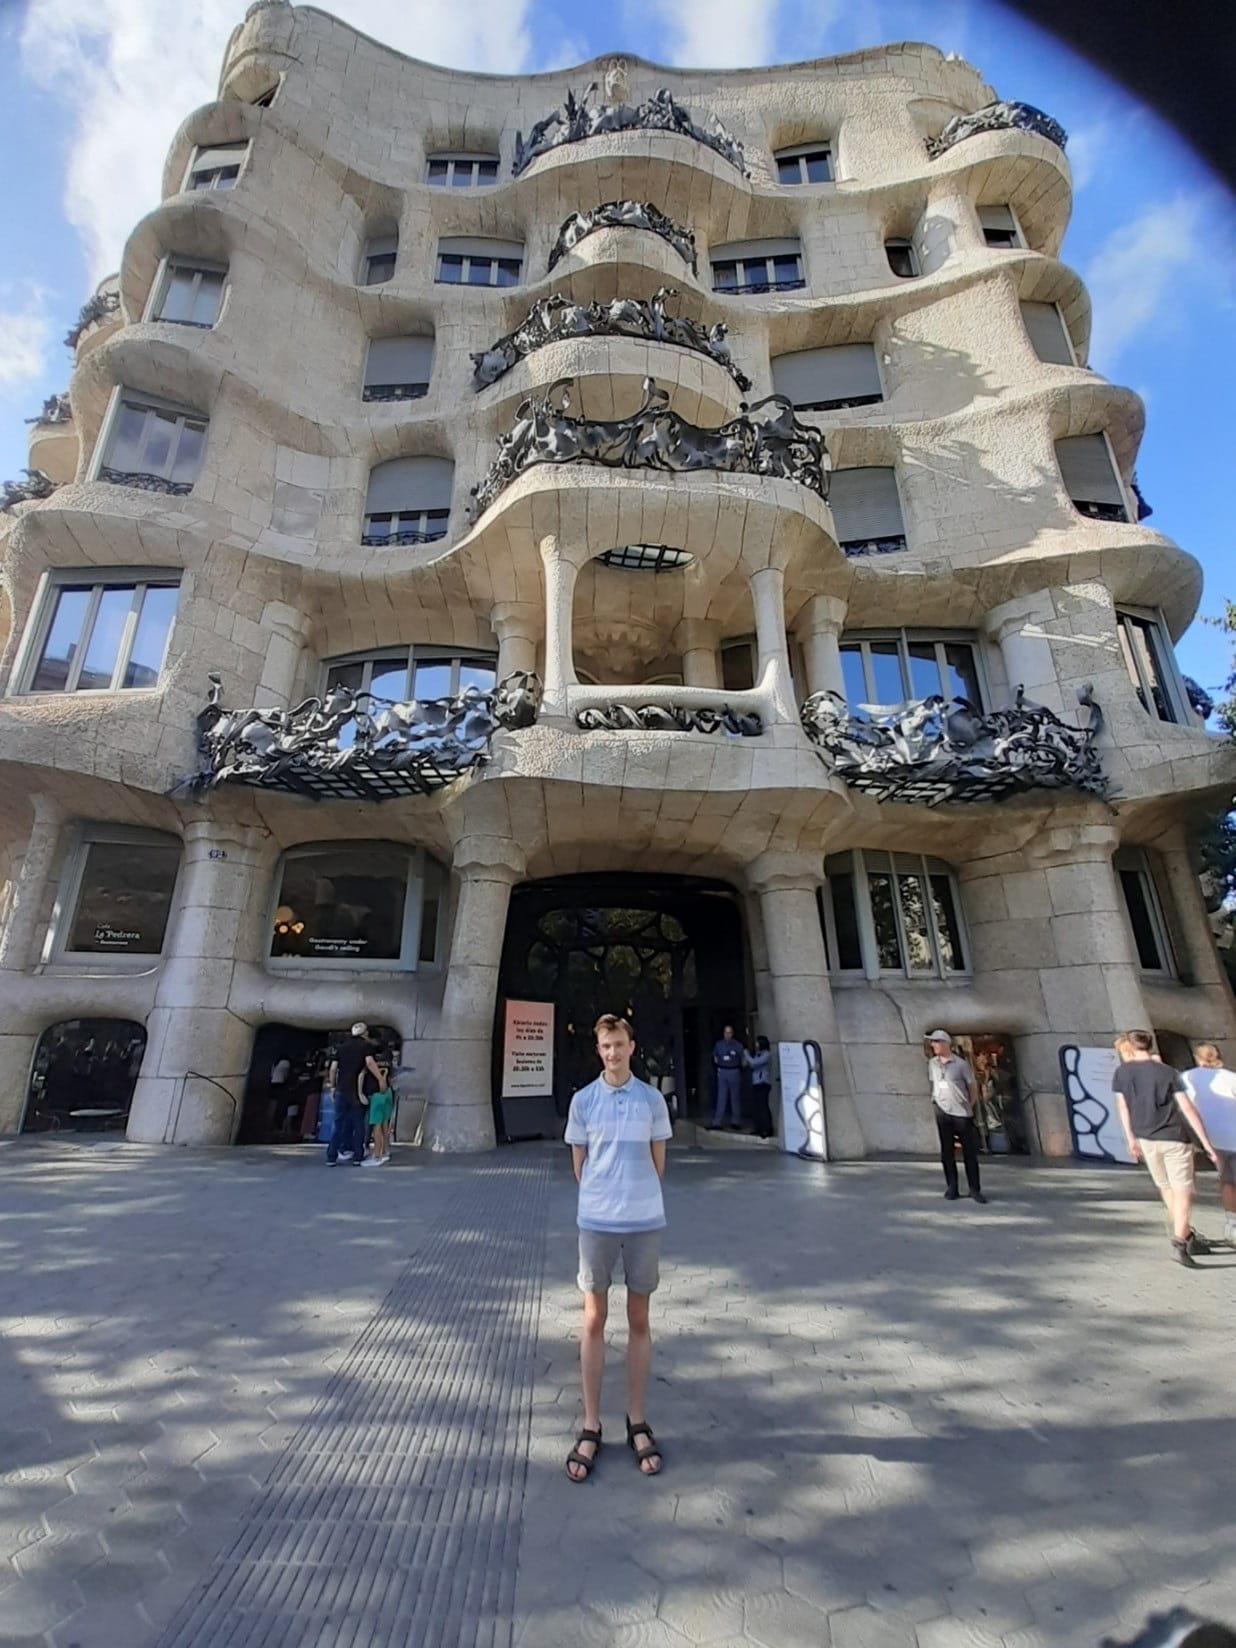 Adam, a student at Essex on a Summer abroad experience in Barcelona. Adam is standing outside a building called Casa Mila